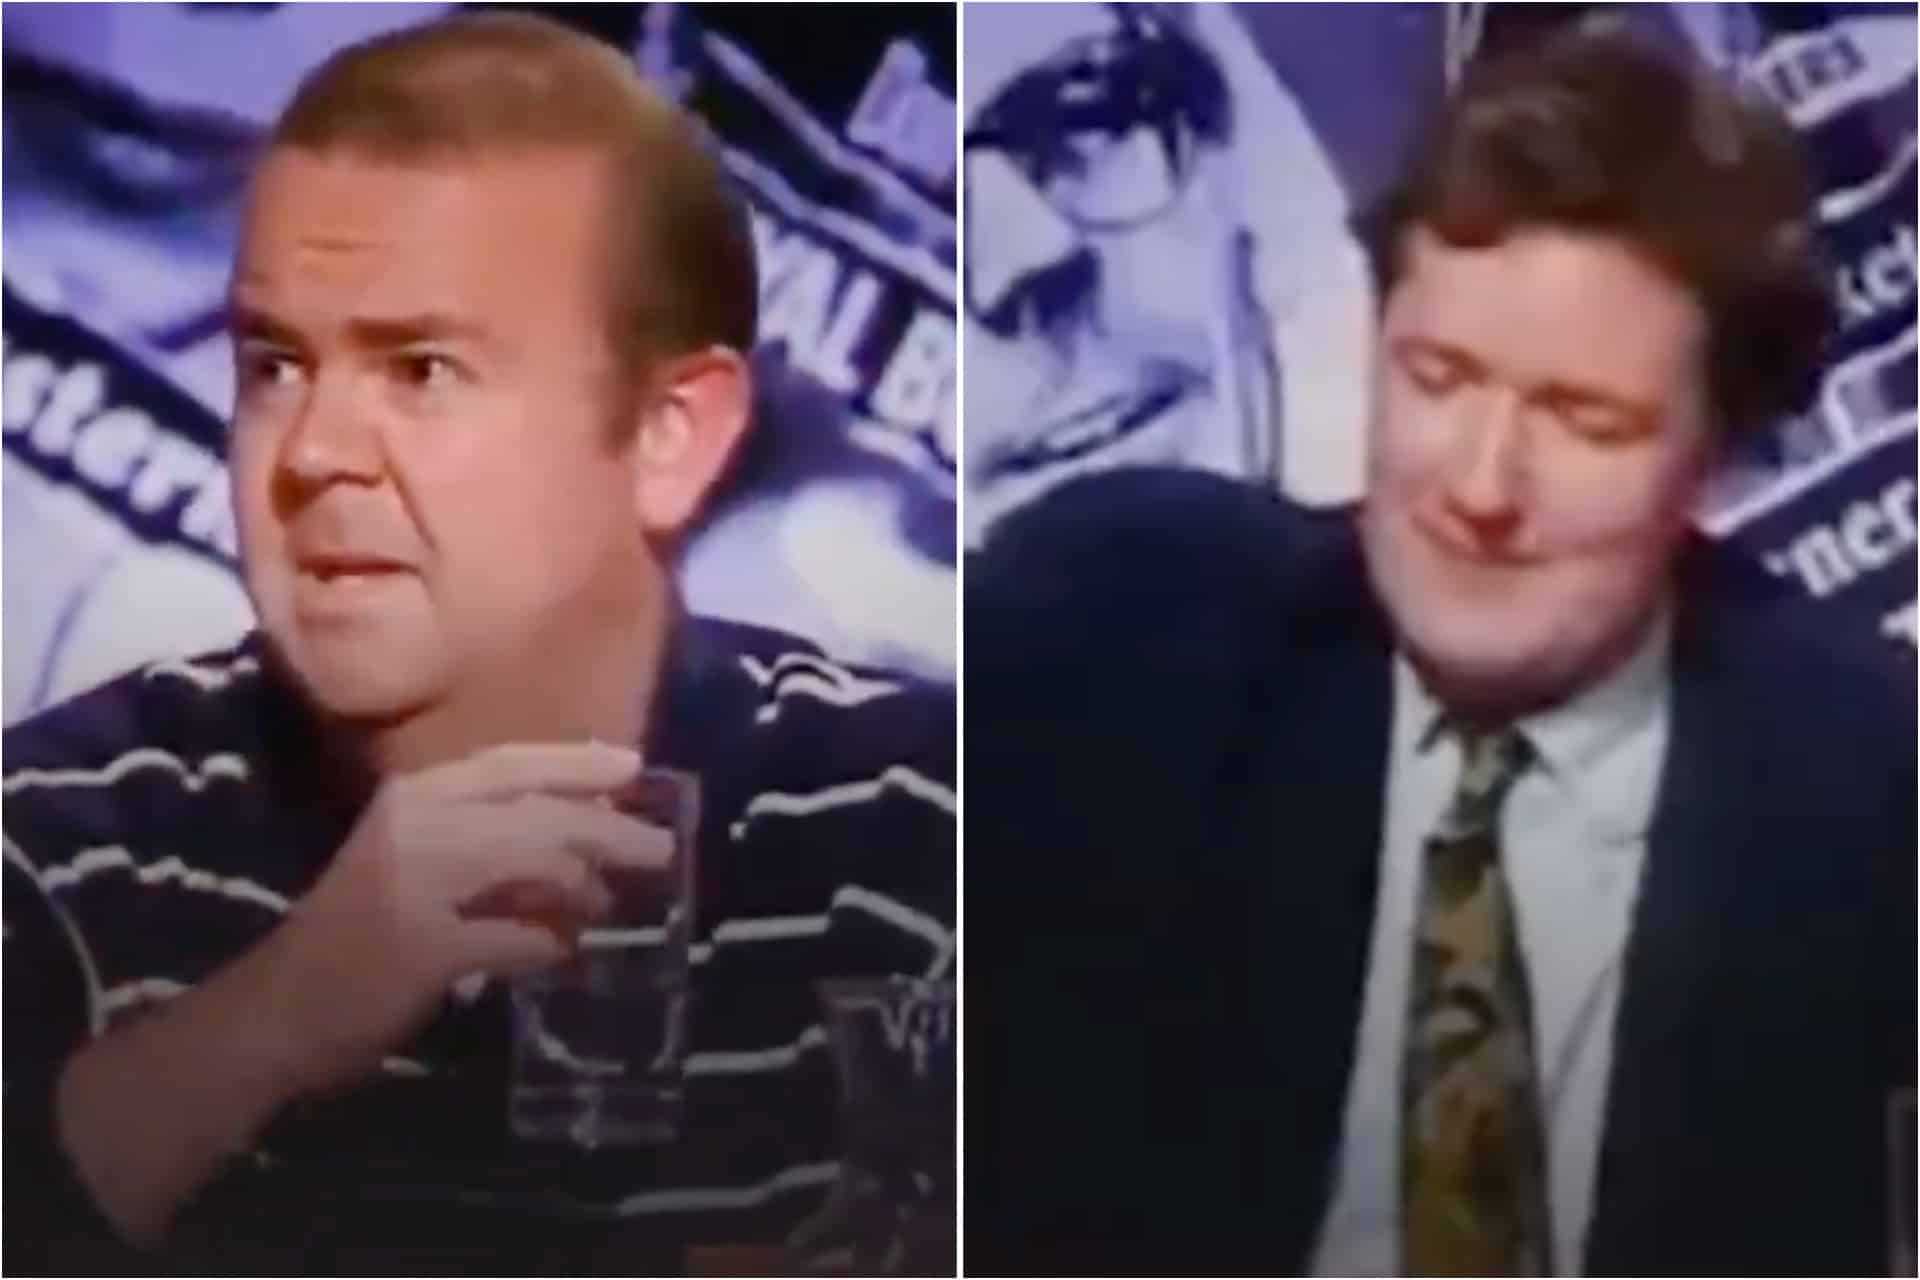 Ian Hislop opens up about being harassed by Piers Morgan